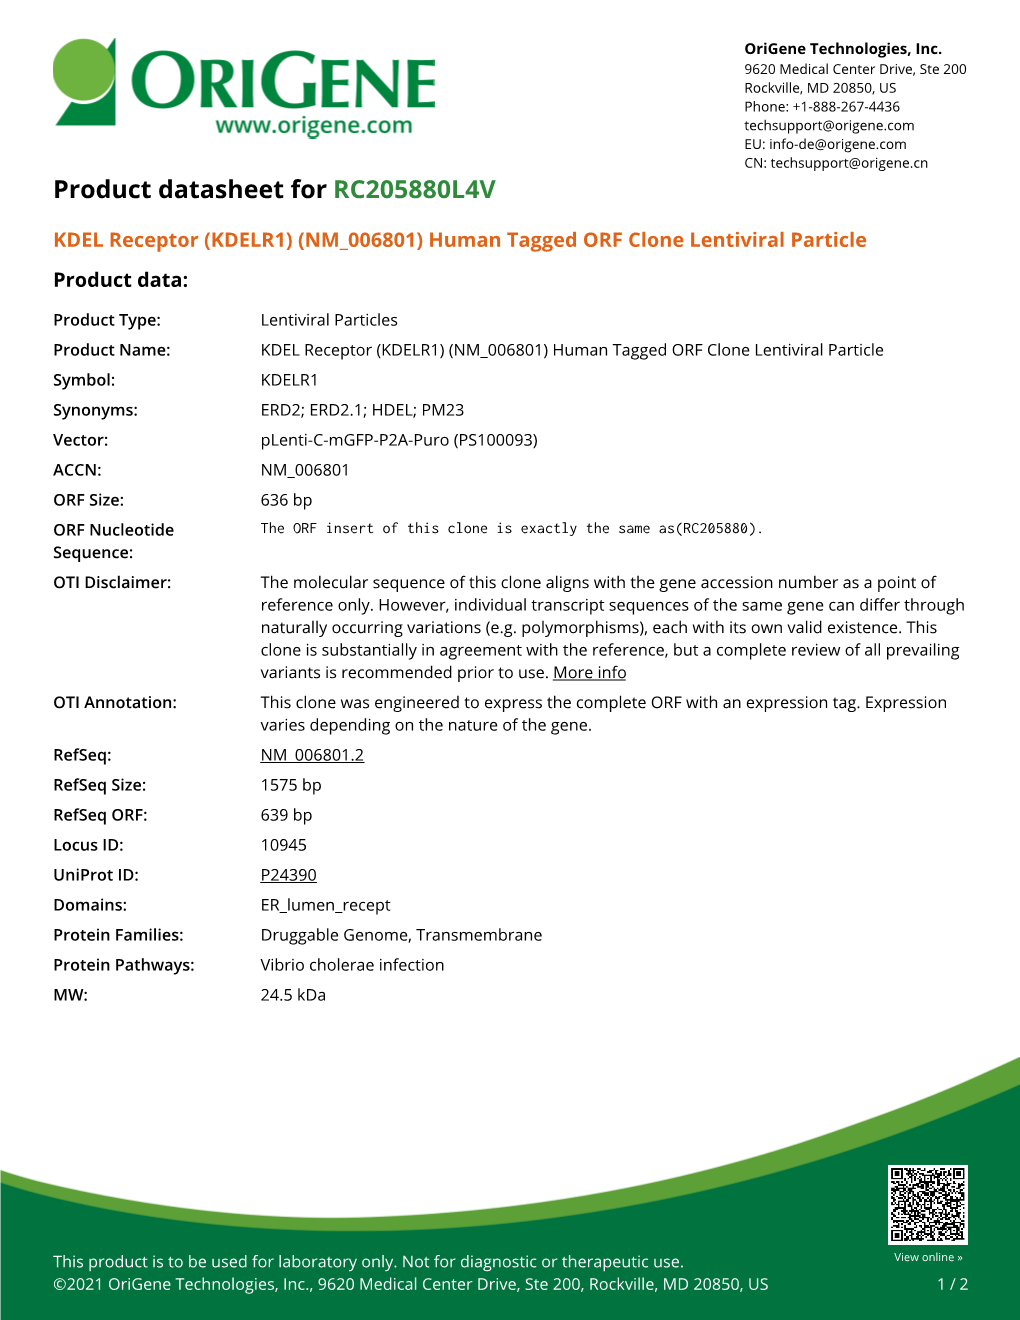 Human Tagged ORF Clone Lentiviral Particle – RC205880L4V